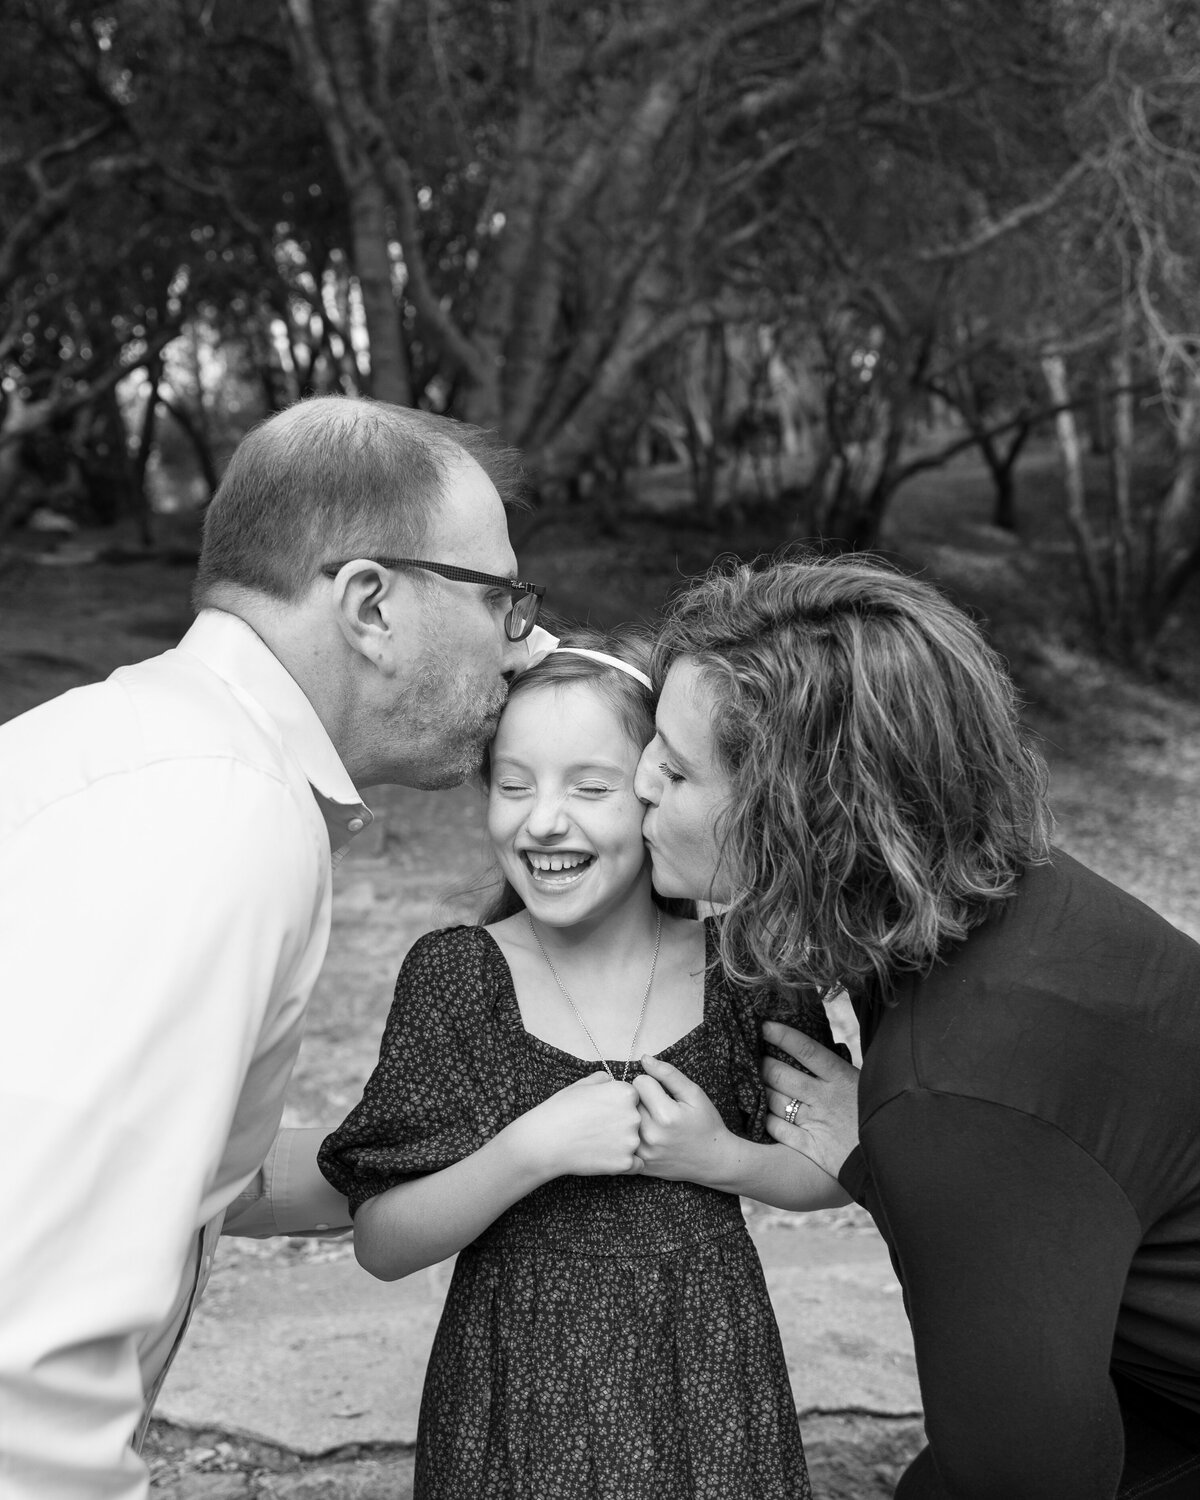 Parents give their daughter a kiss on her cheeks